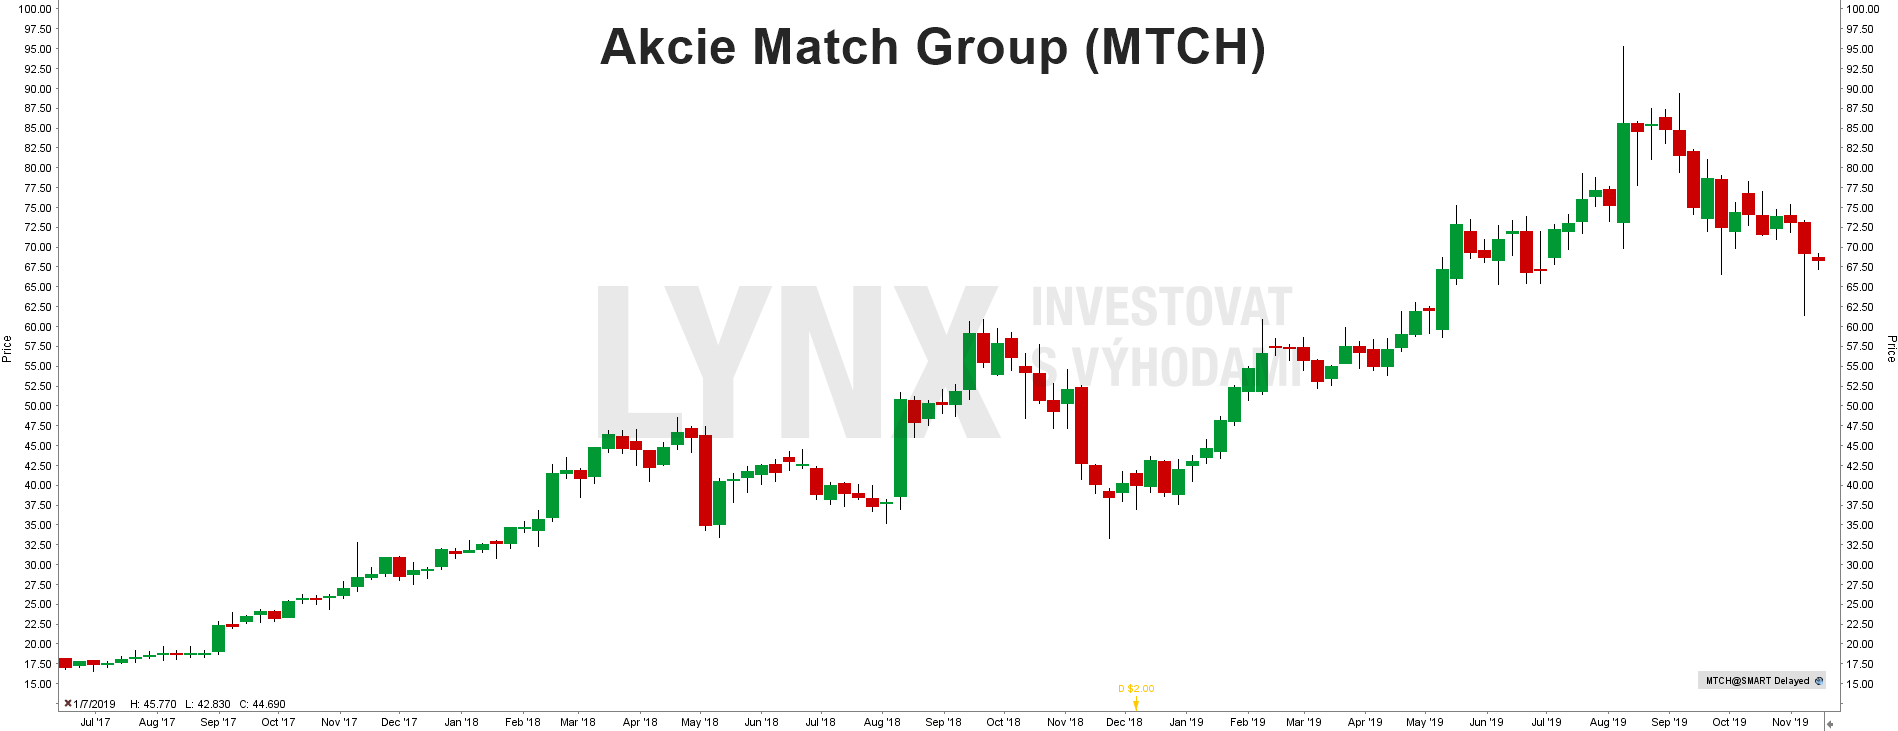 Akcie Match Group - Online Dating 2.0 - graf